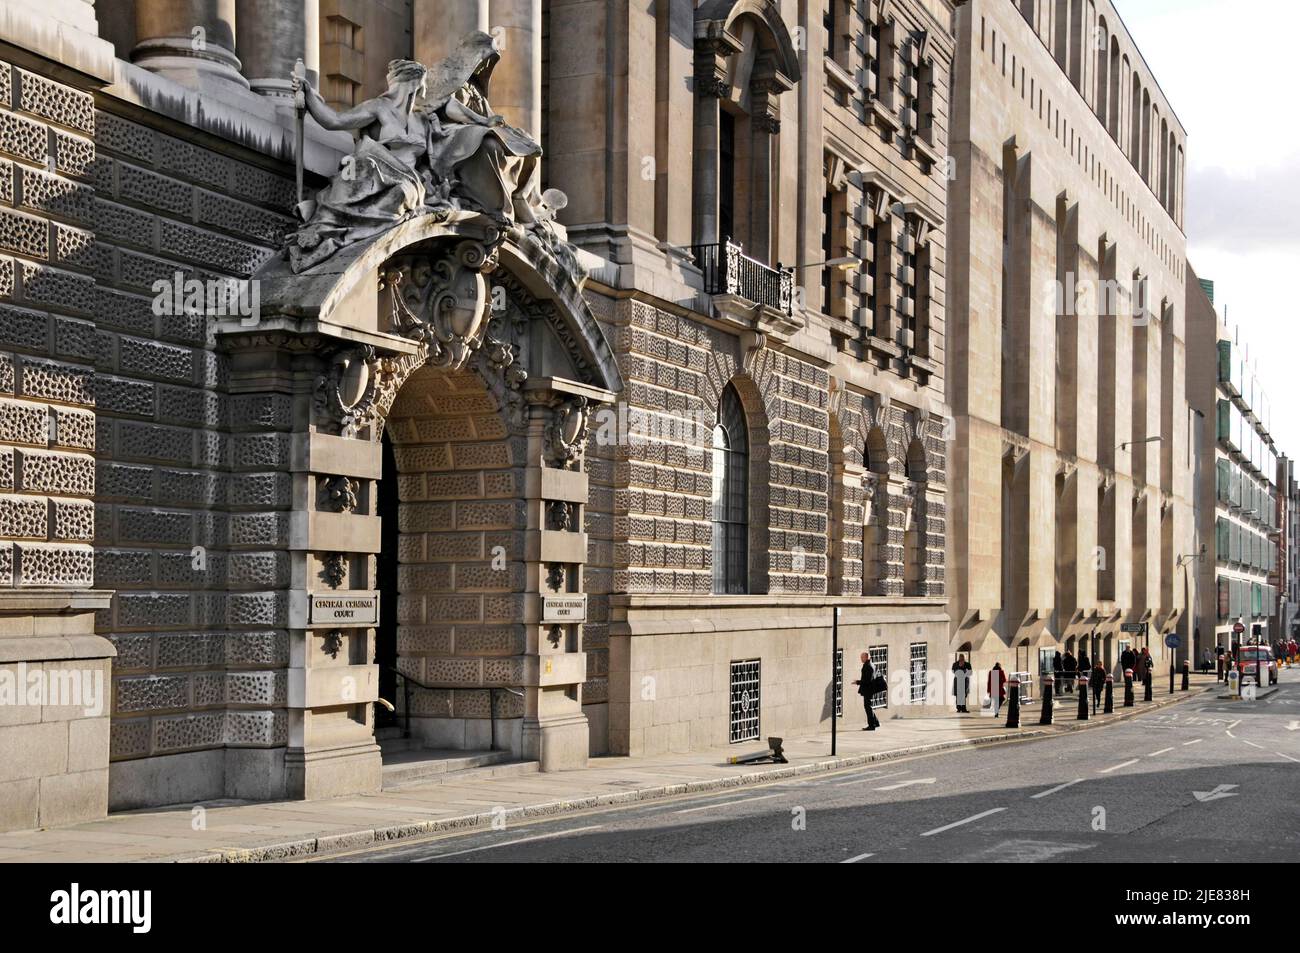 Old Bailey London Street & 1902 Crown Court Old Bailey Central Criminal Court of England & Wales Modern South Block Beyond City of London England Großbritannien Stockfoto